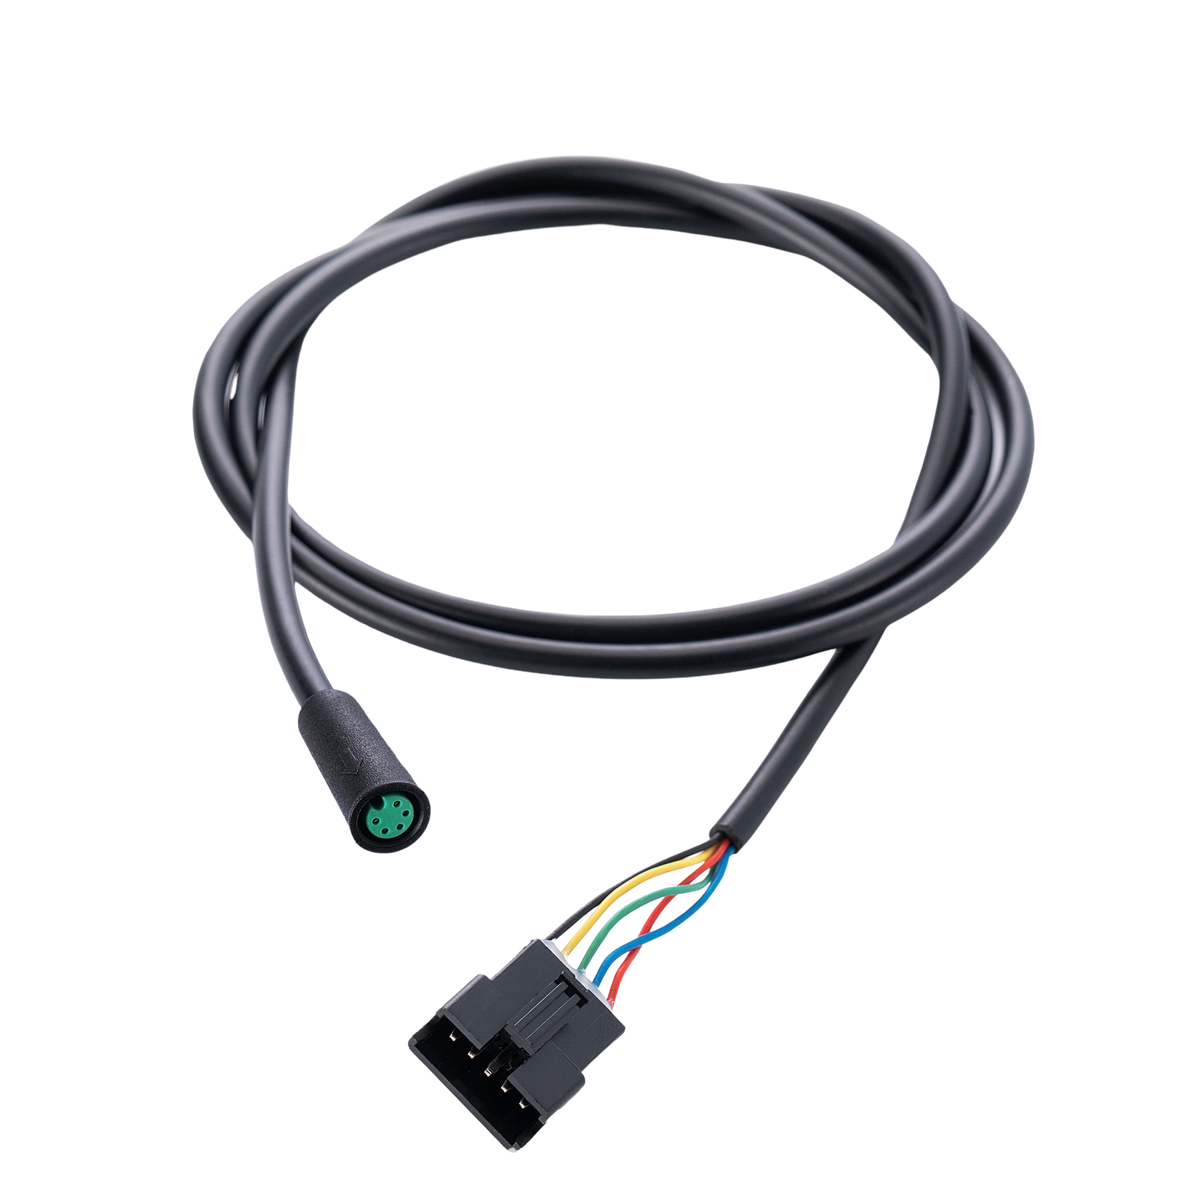 Cable between display and electronics VX1